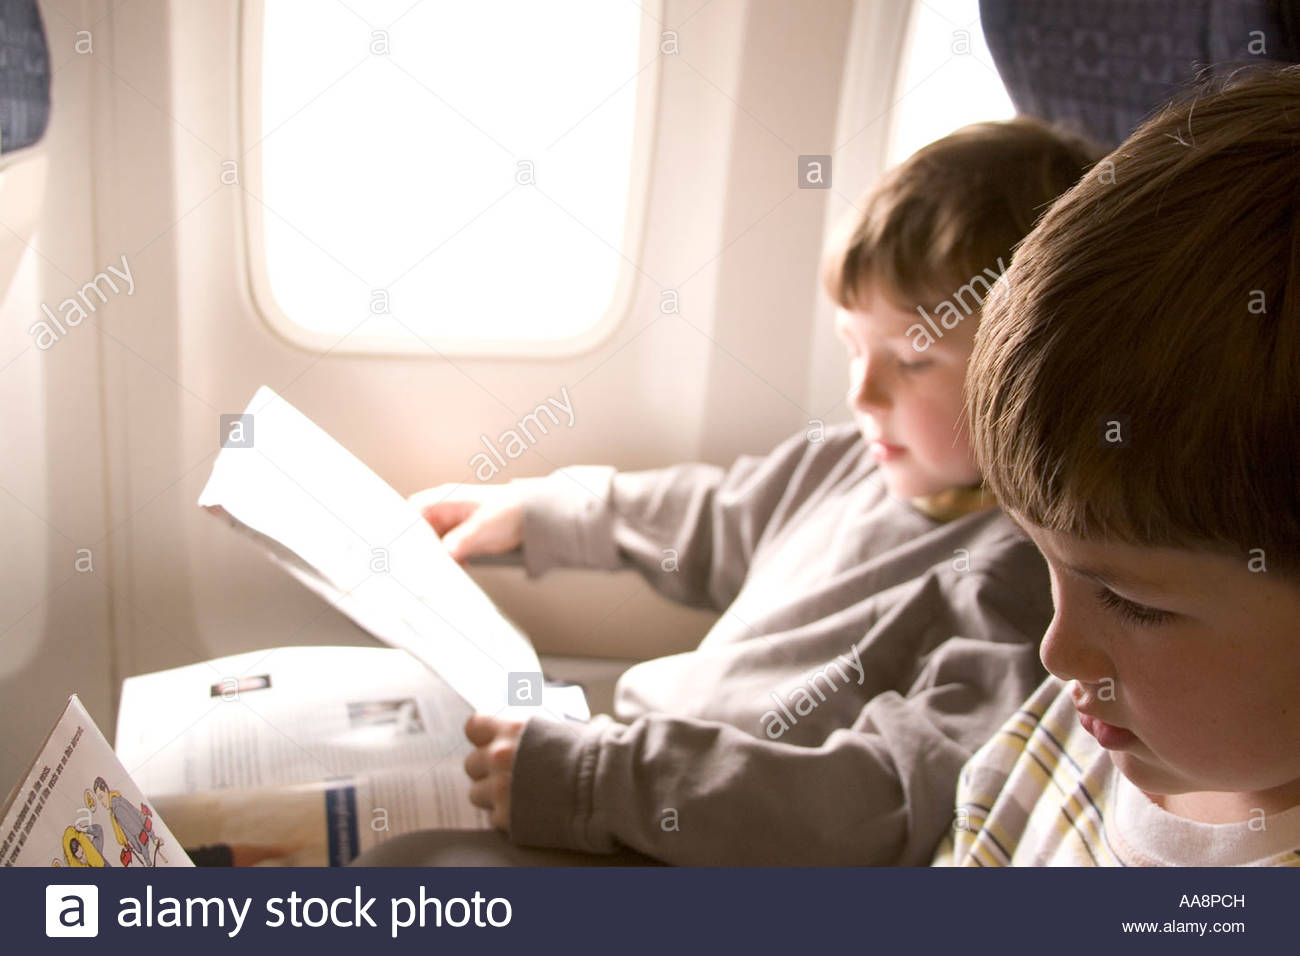 airplane safety instructions video